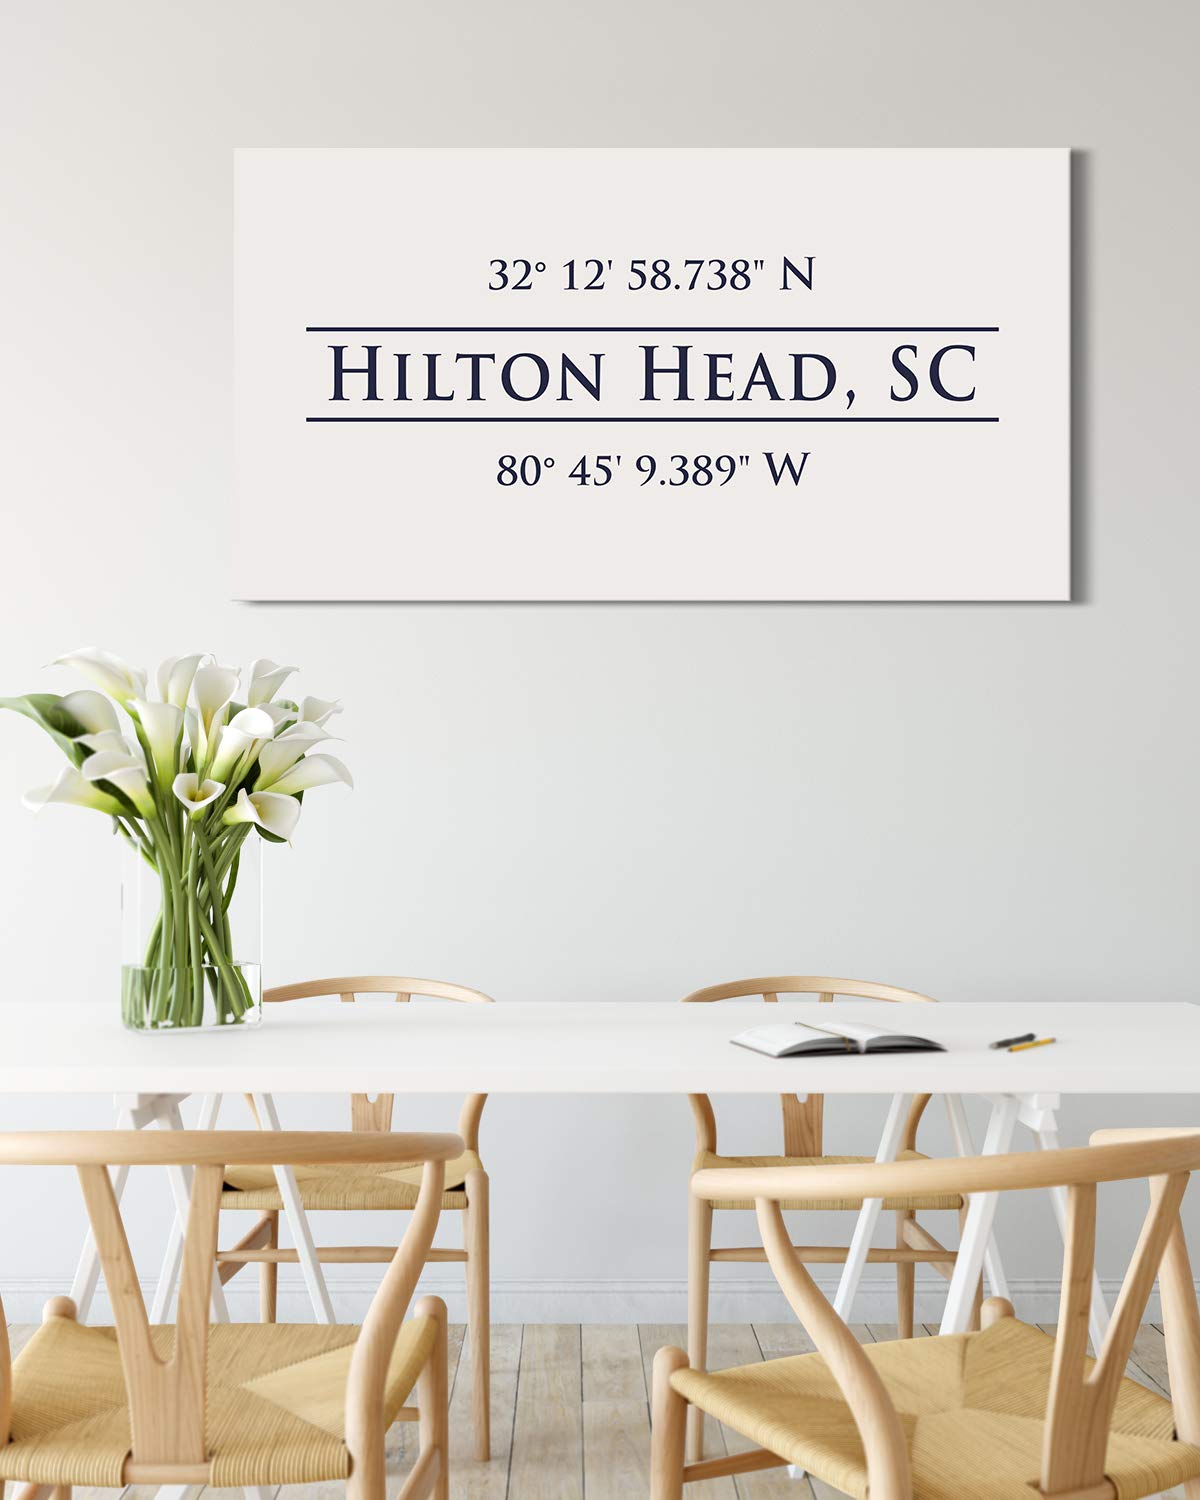 Hilton Head, SC 32° 12' 58.738" N, 80° 45' 9.389" W - Wall Decor Art Canvas with an offwhite background - Ready to Hang - Great for above a couch, table, bed or more